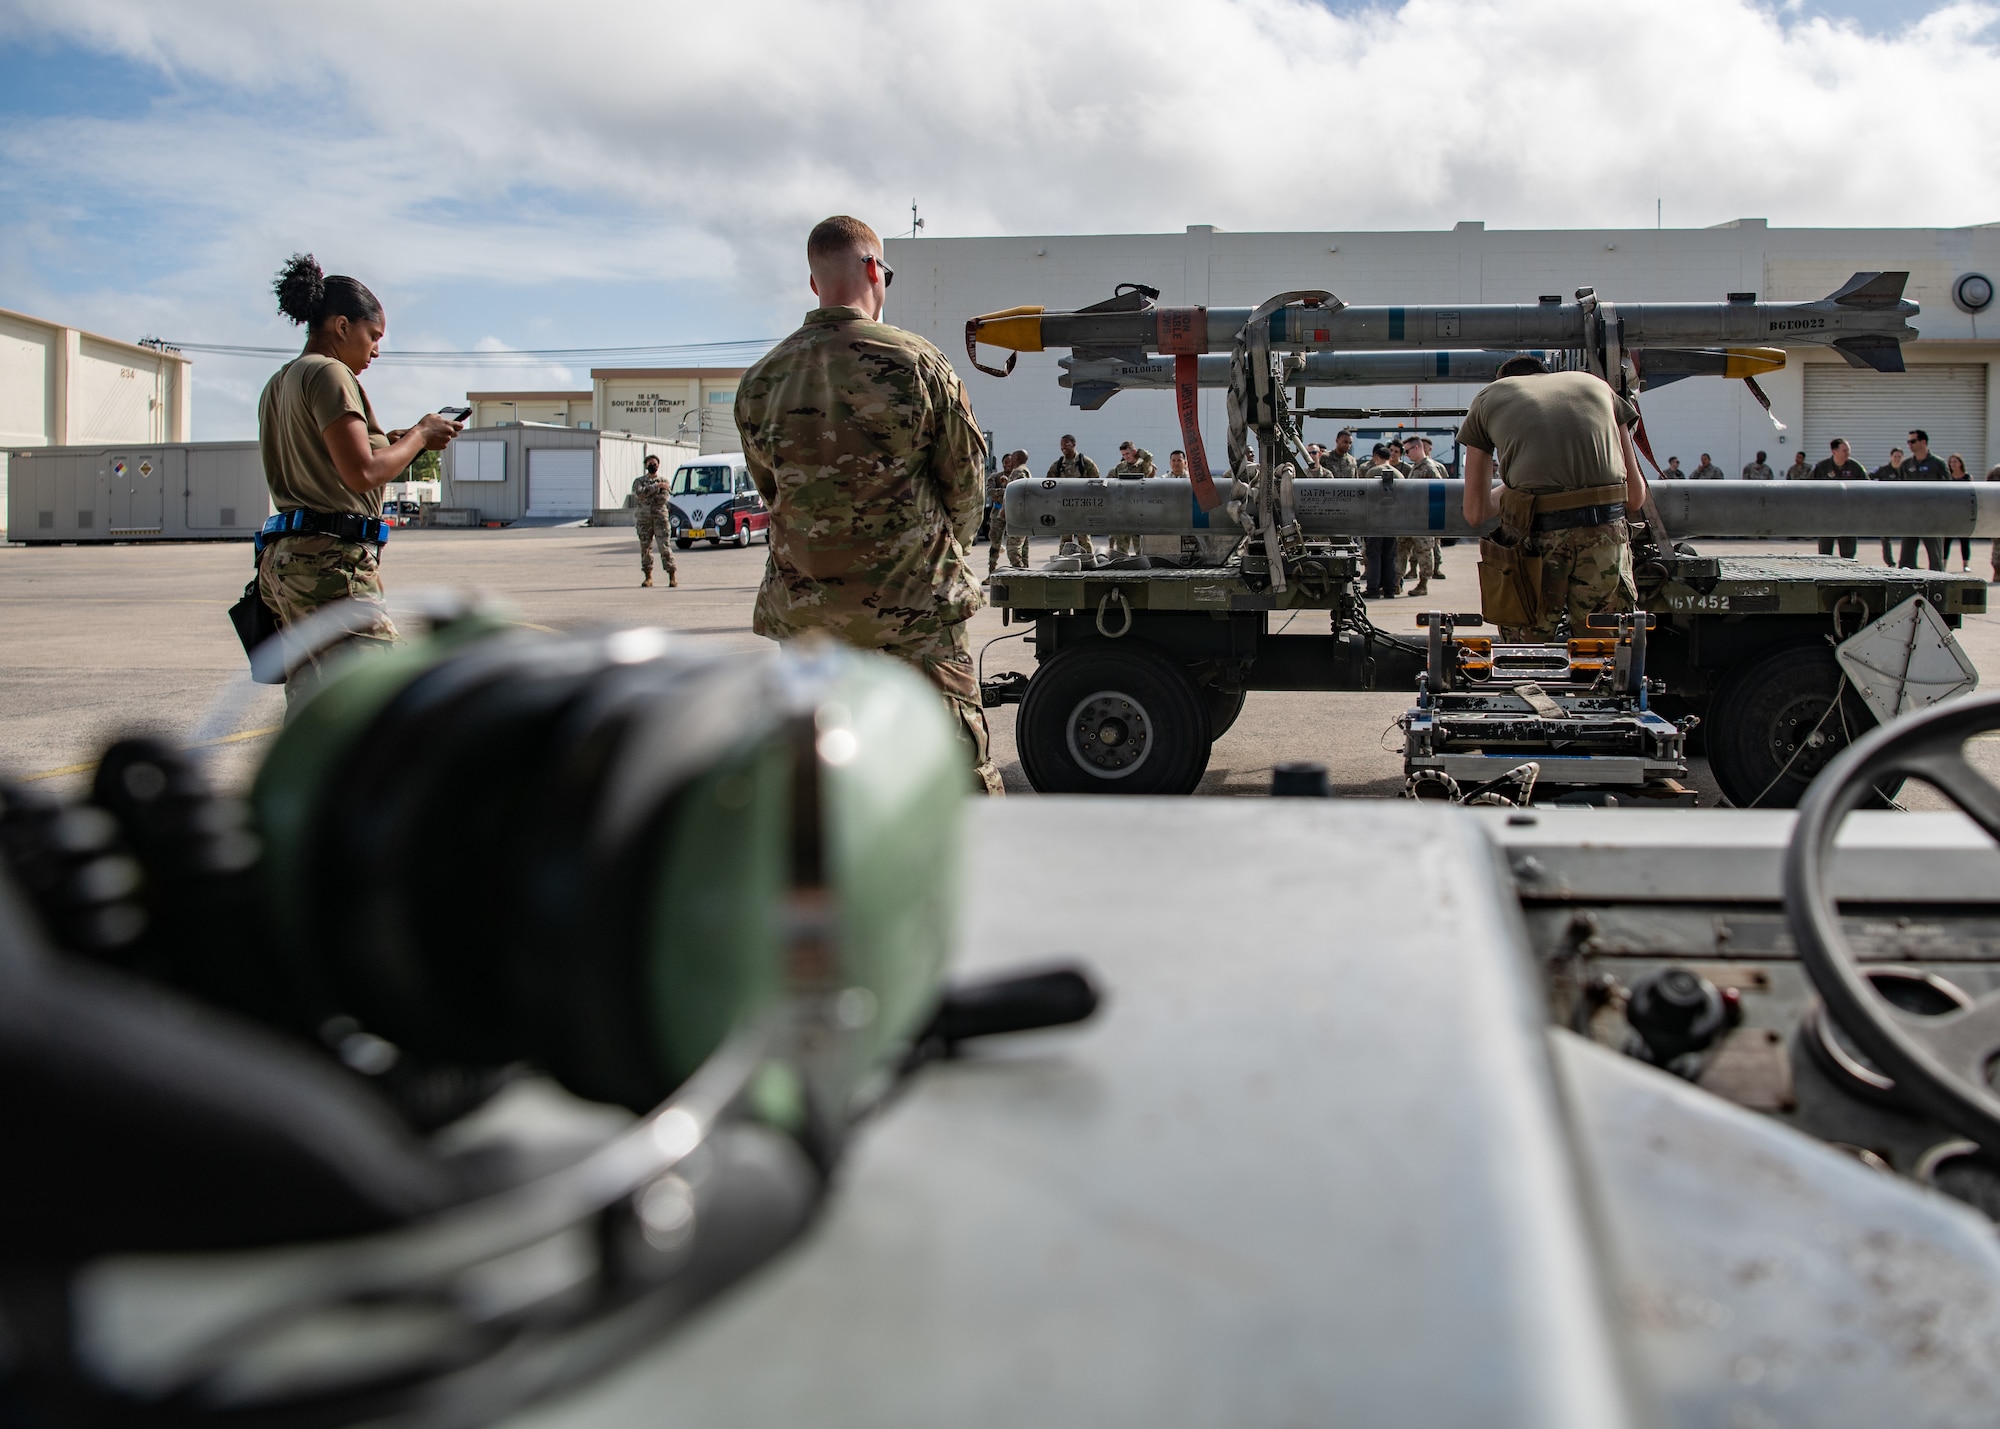 Three Airmen work together to load munitions